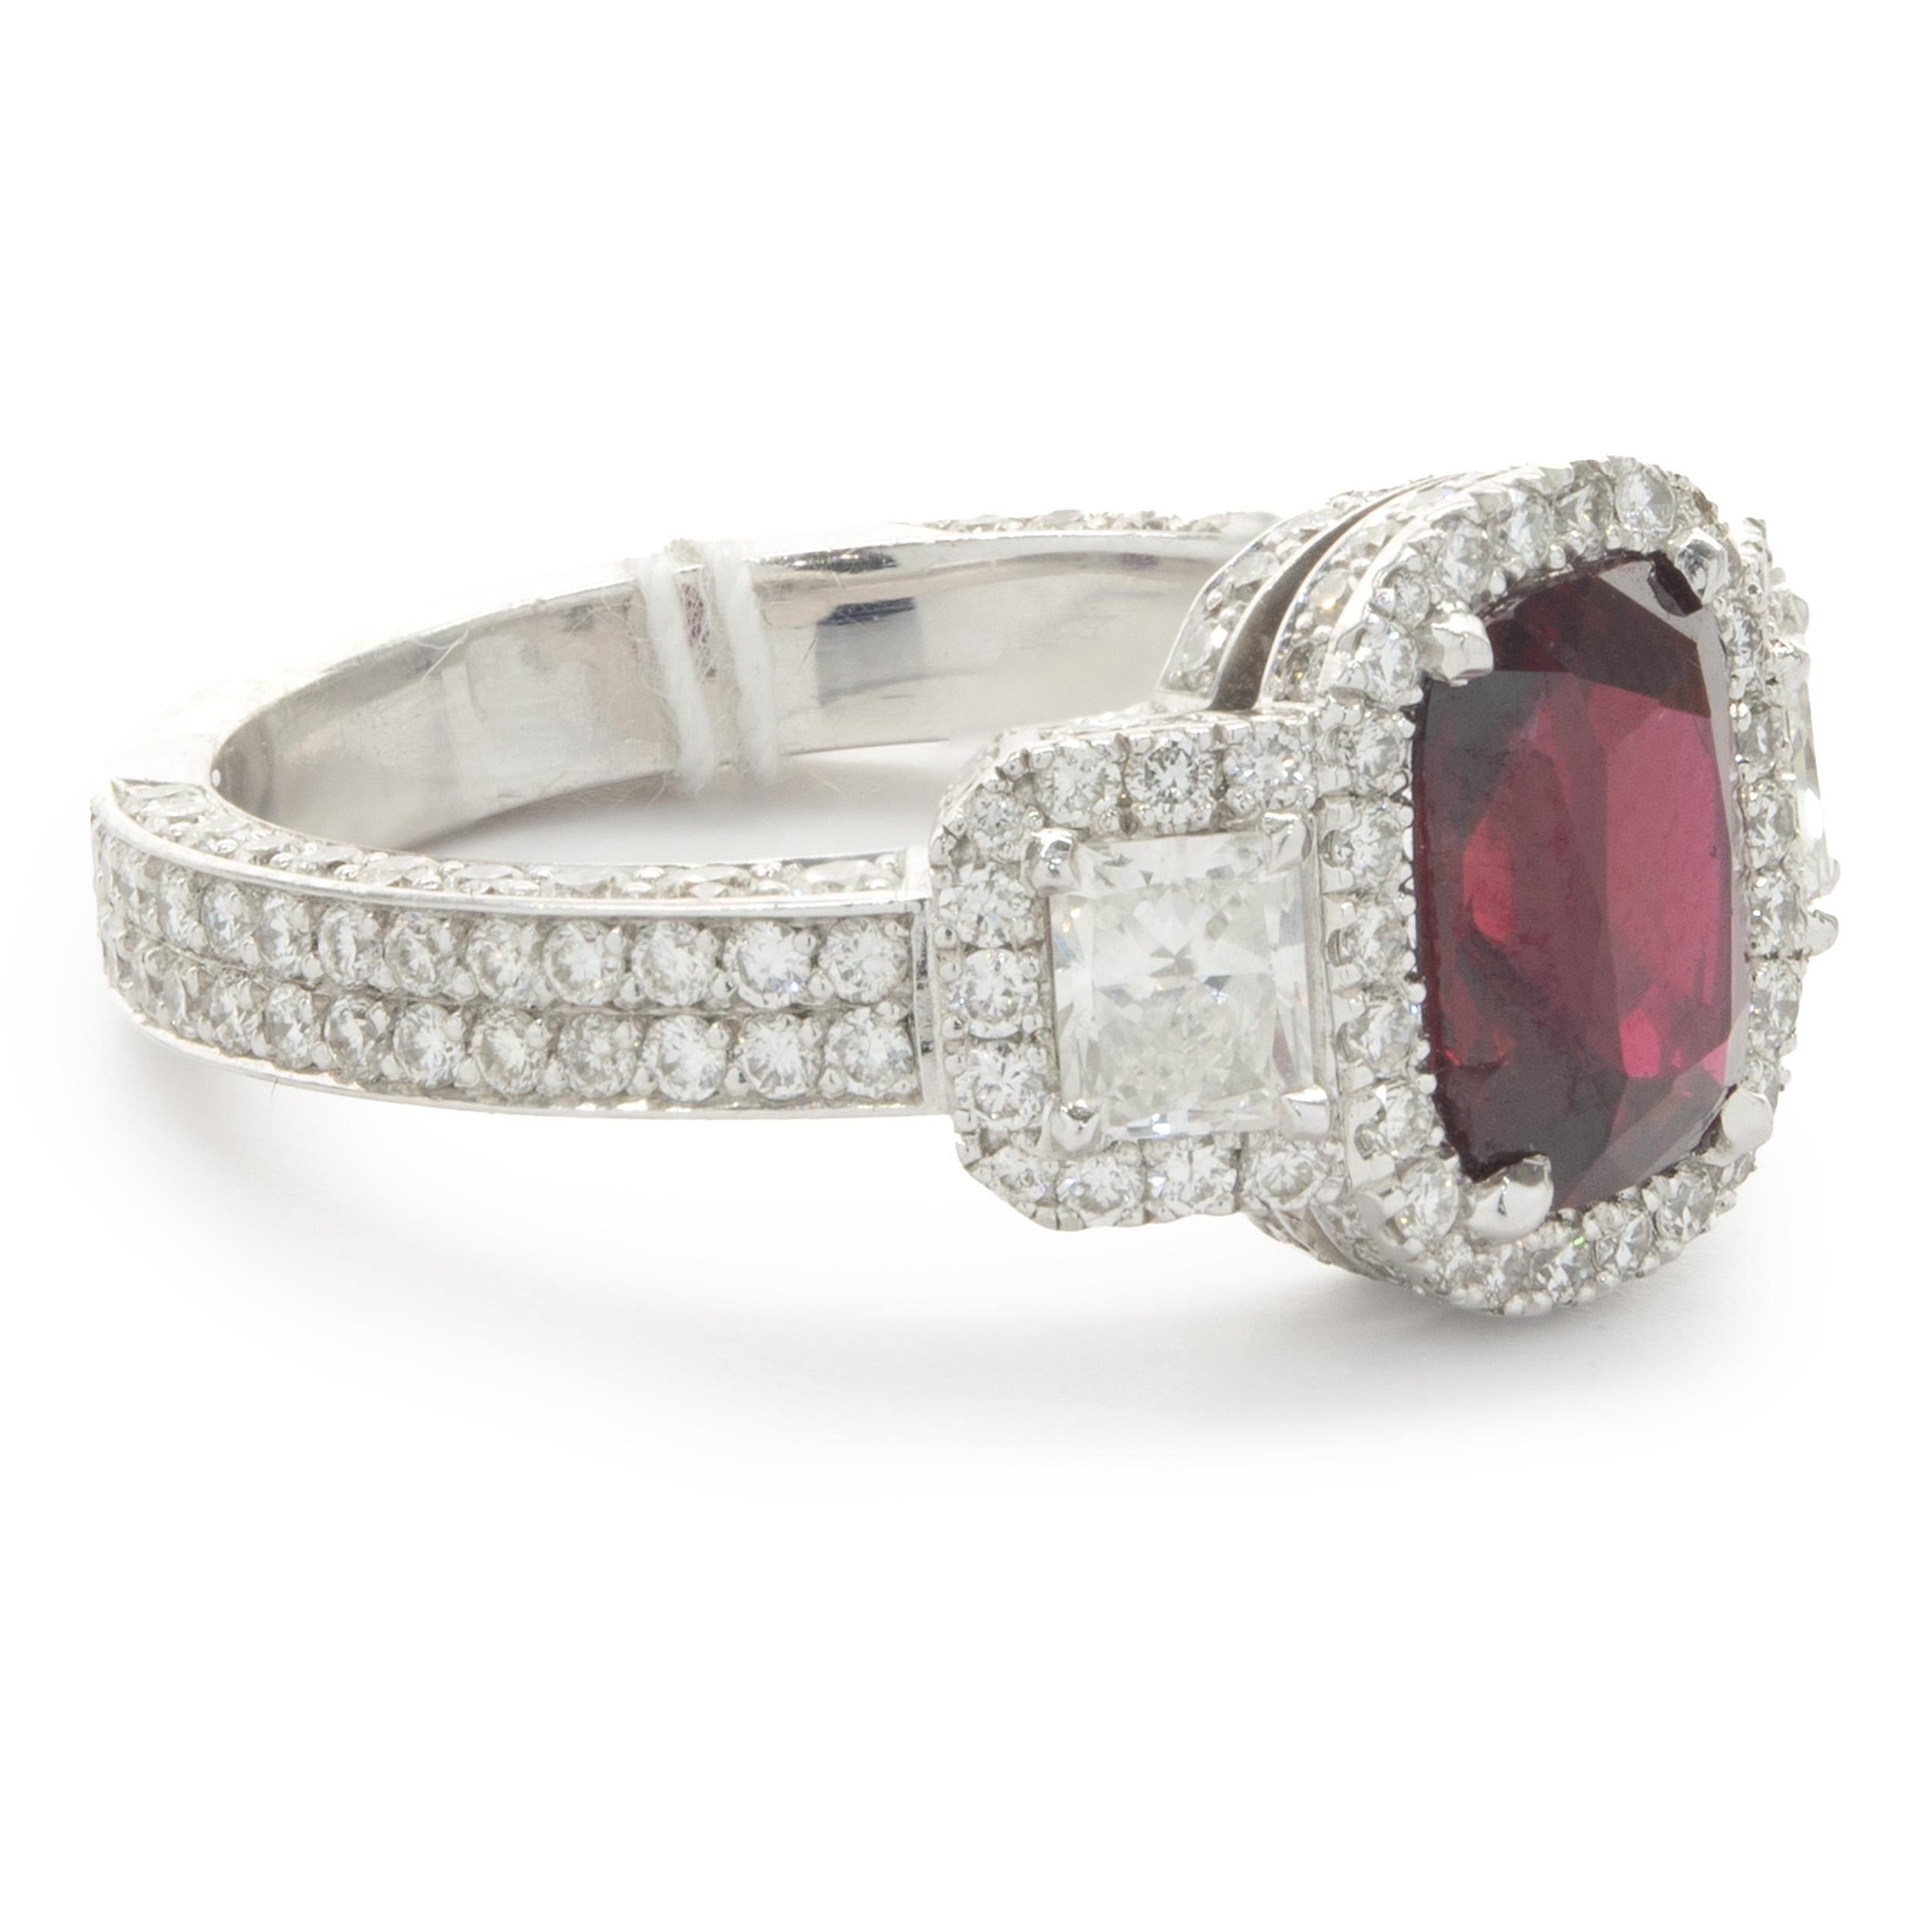 Designer: custom
Material: 18K white gold
Diamond: round brilliant & princess cut = 1.60cttw
Color: G / H
Clarity: VS2-SI1
Ruby: 1 oval cut = 2.01ct
Color: Pigeons Blood
Clarity: AA
Dimensions: ring top measures 10.85mm wide
Ring Size: 6.5